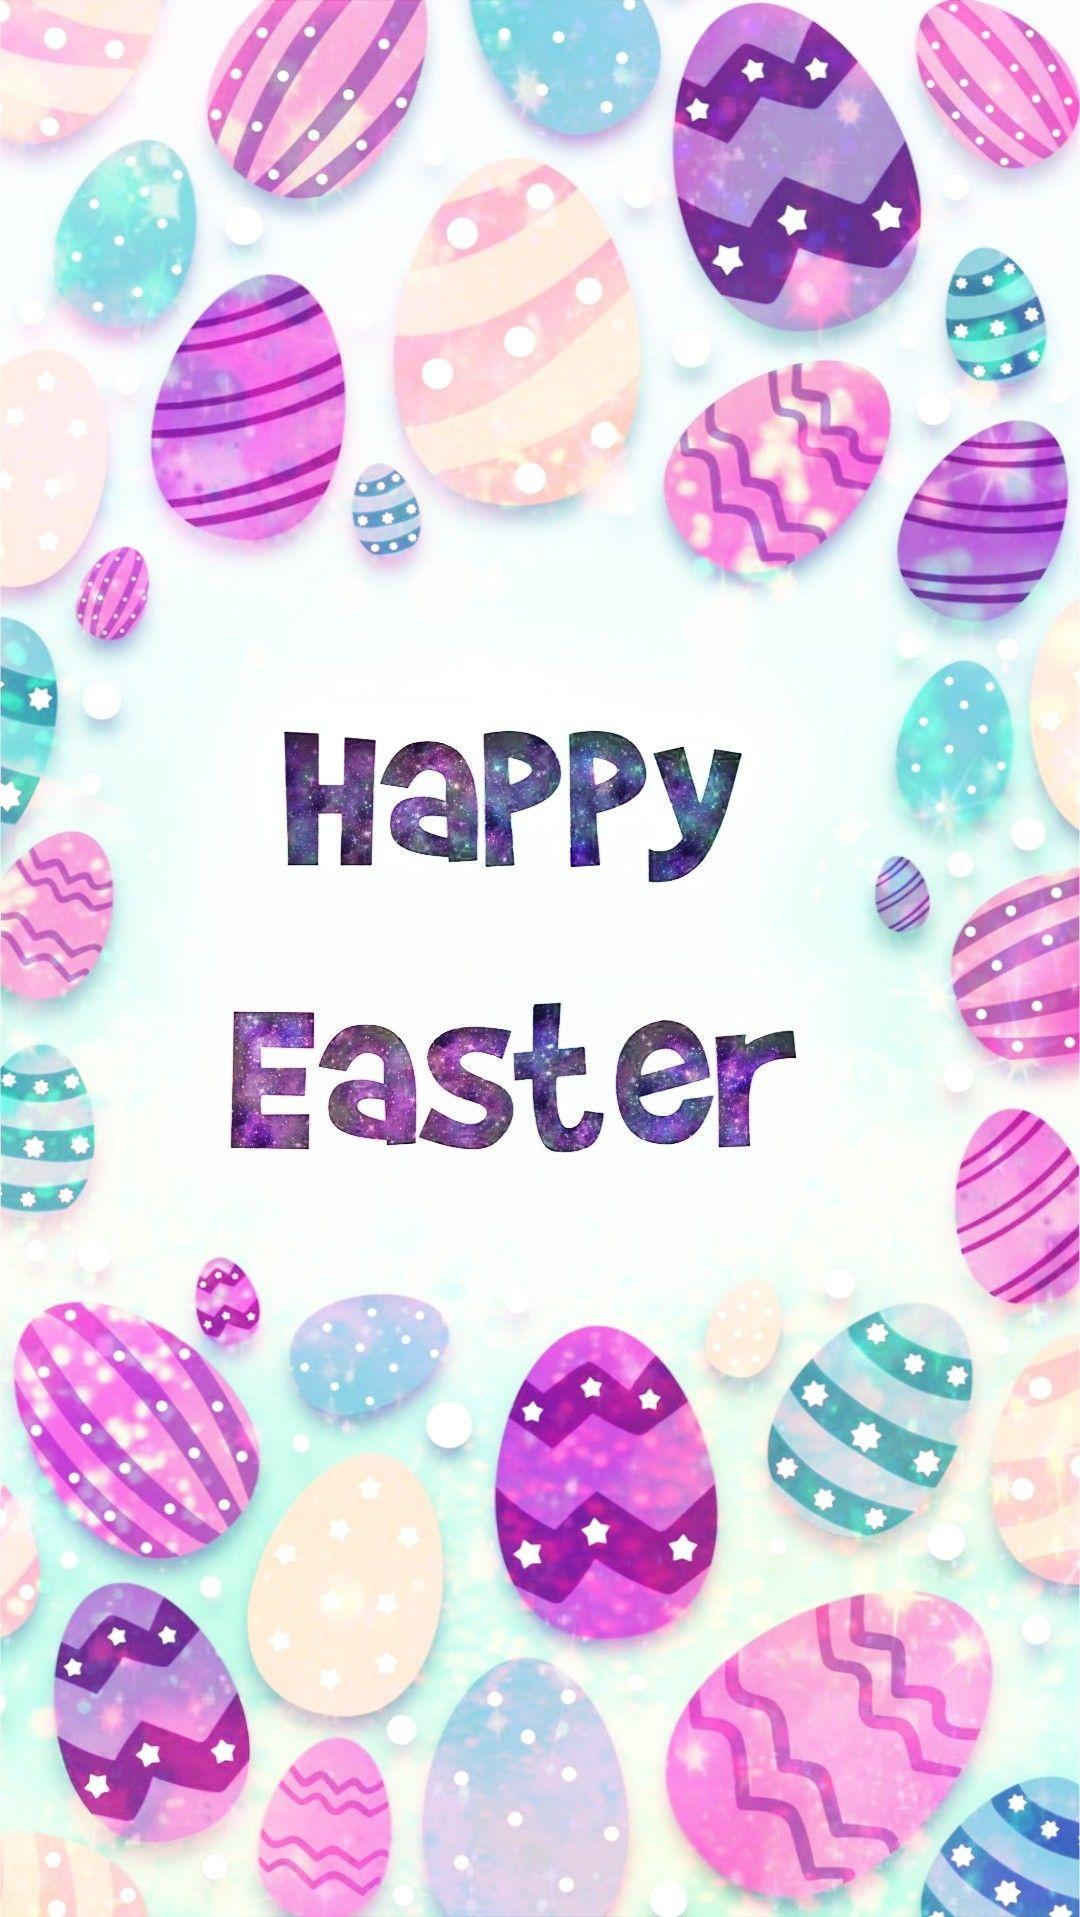 Glittery Happy Easter, made by me #patterns #purple #glitter #sparkles #galaxy #wallpaper #bac. Easter wallpaper, Happy easter wallpaper, iPhone wallpaper easter